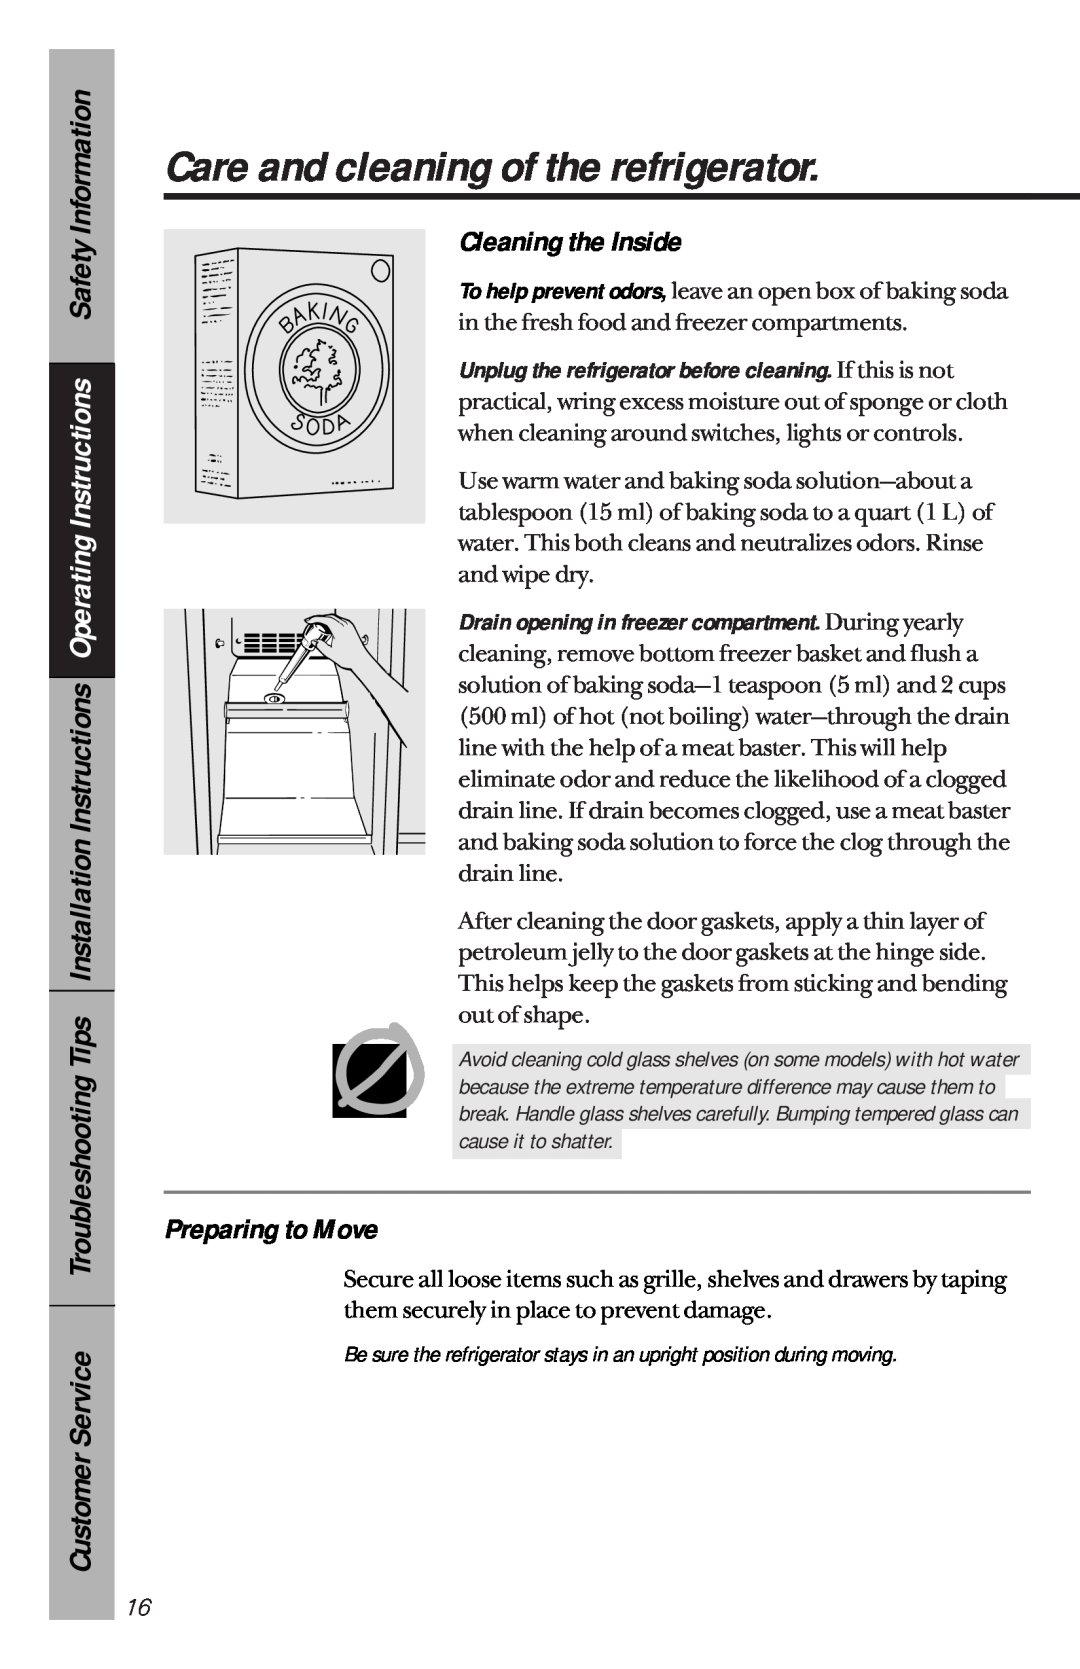 GE 162D3941P005 owner manual Cleaning the Inside, Preparing to Move, Care and cleaning of the refrigerator 